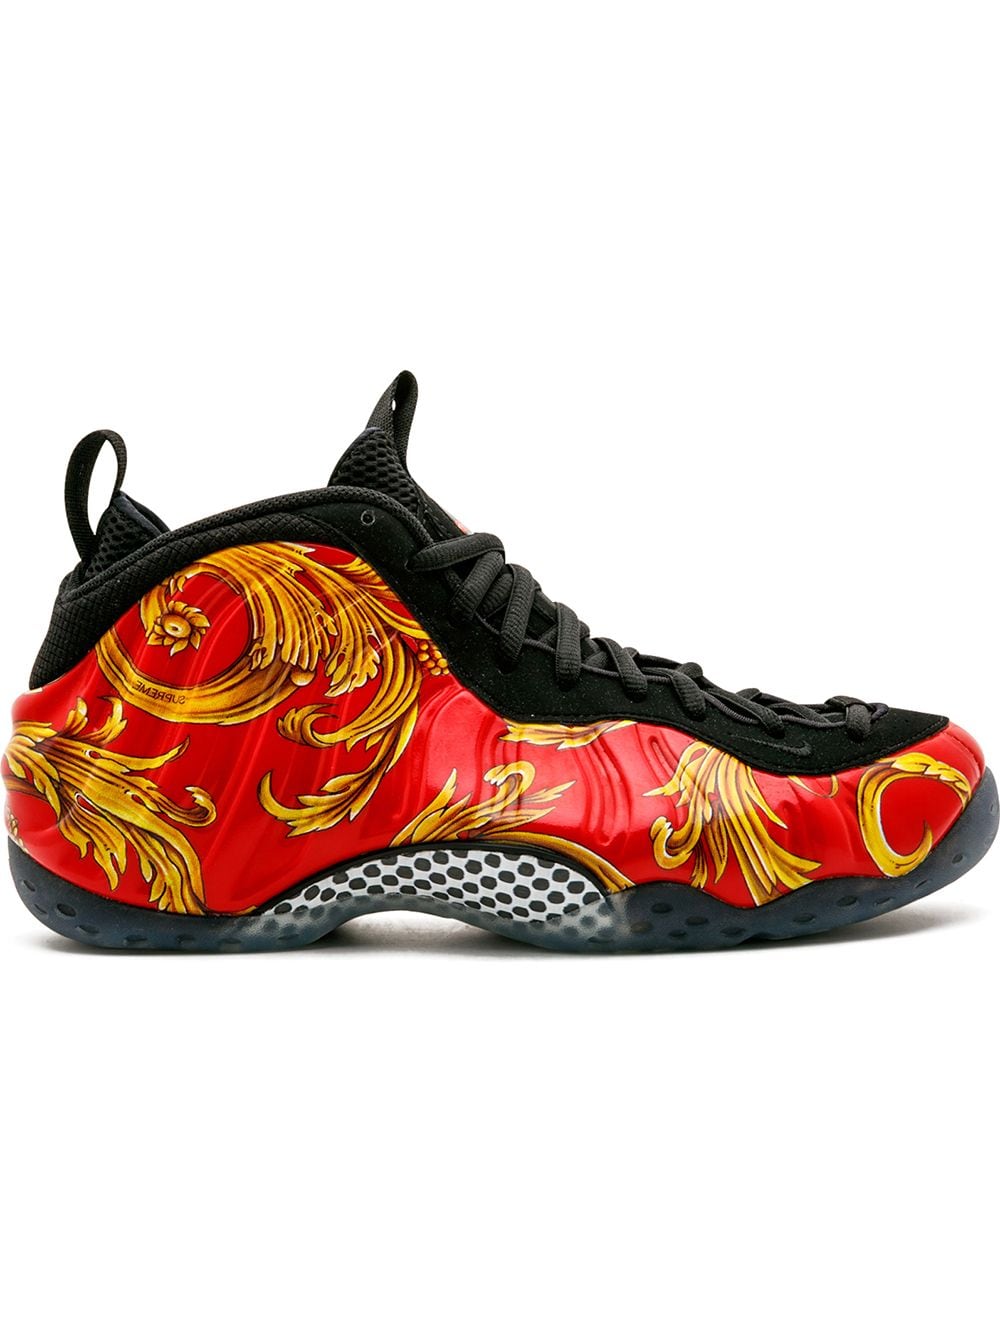 Nike x Supreme Air Foamposite One "Red" sneakers von Nike